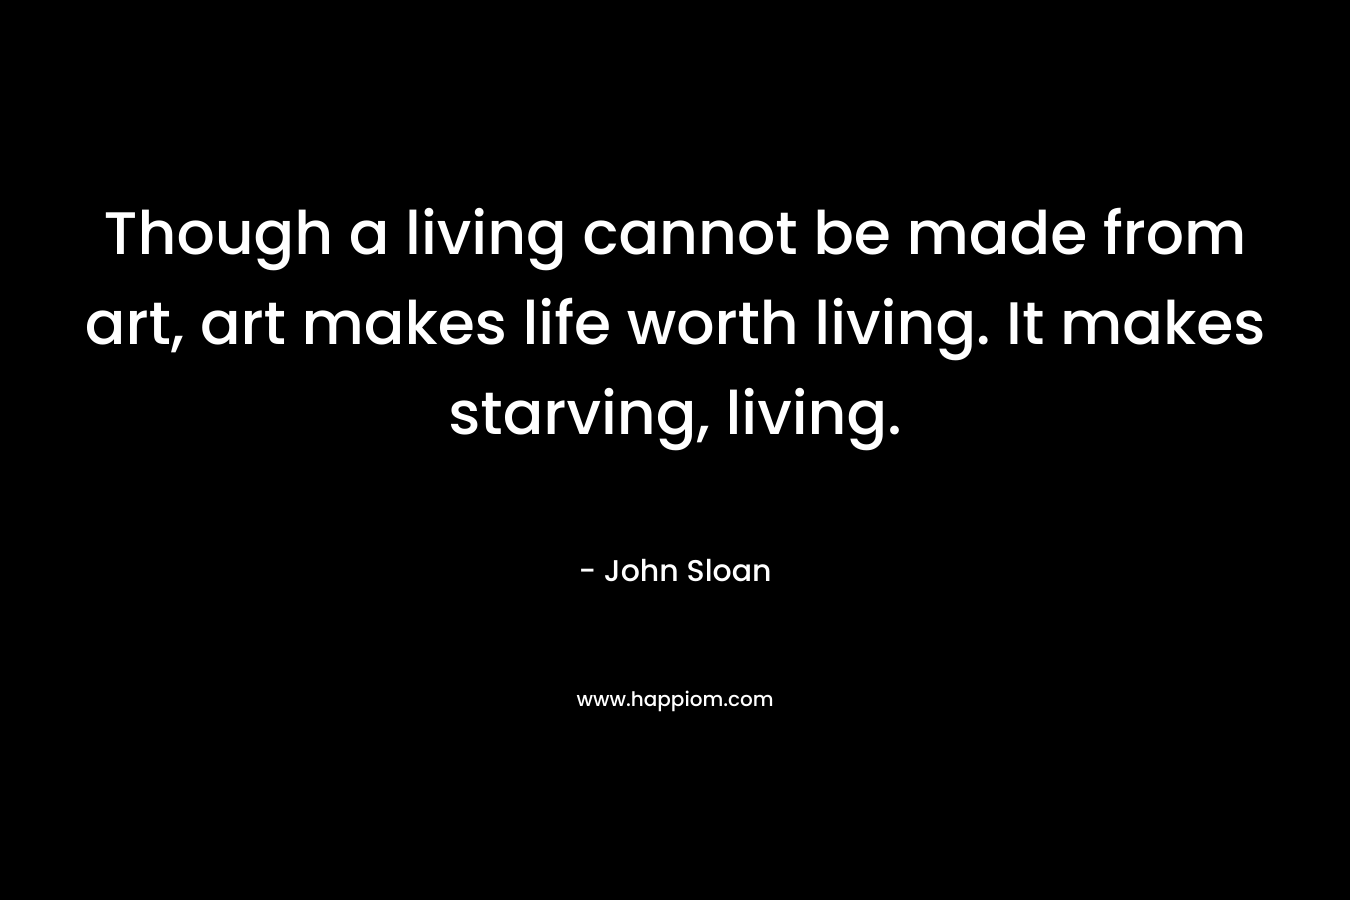 Though a living cannot be made from art, art makes life worth living. It makes starving, living.